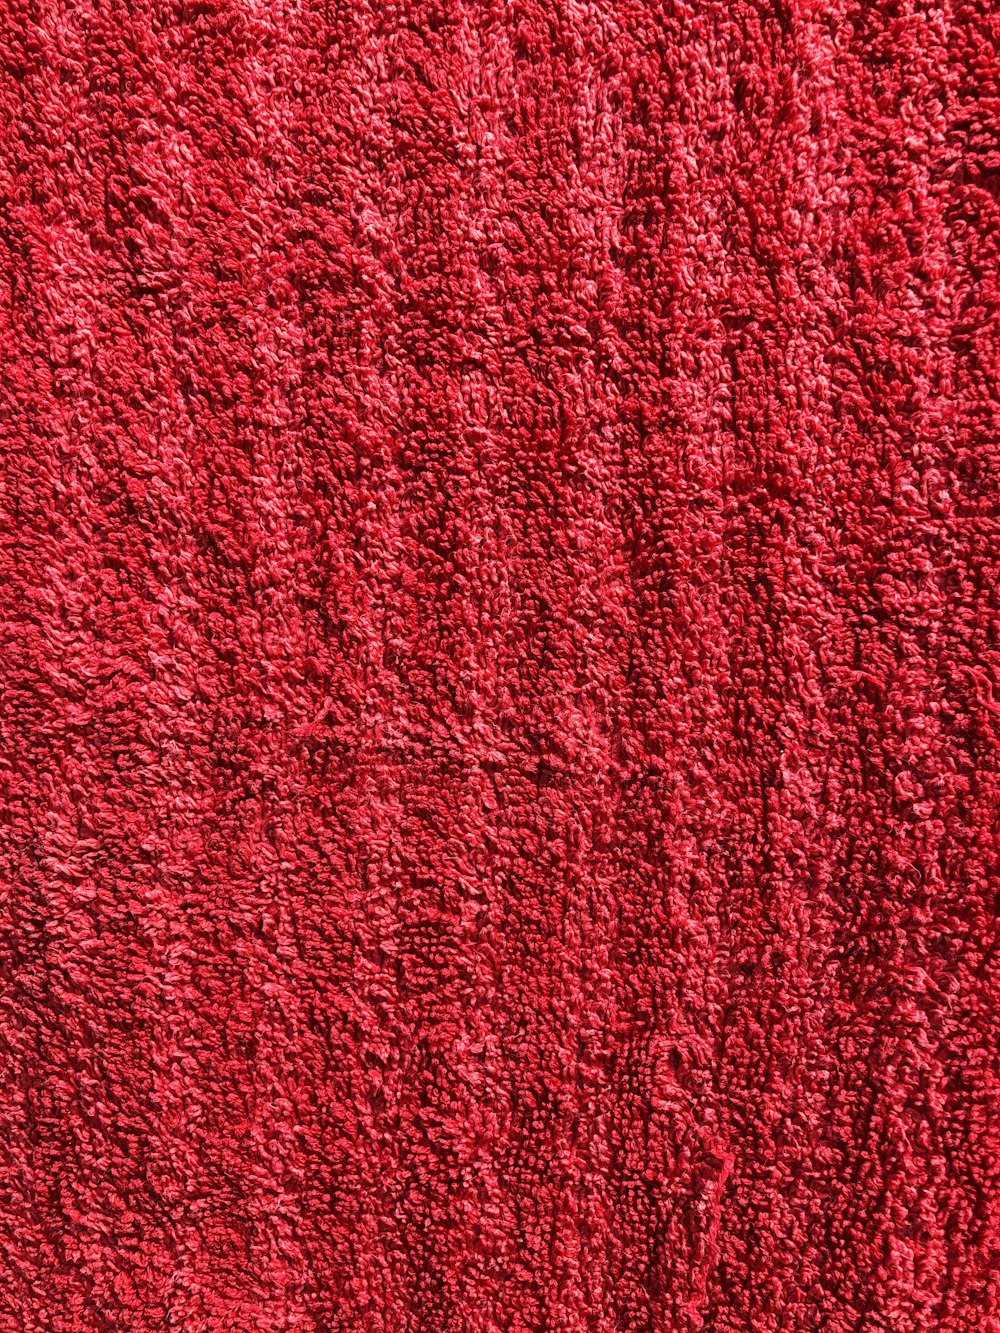 a close up of a red rug